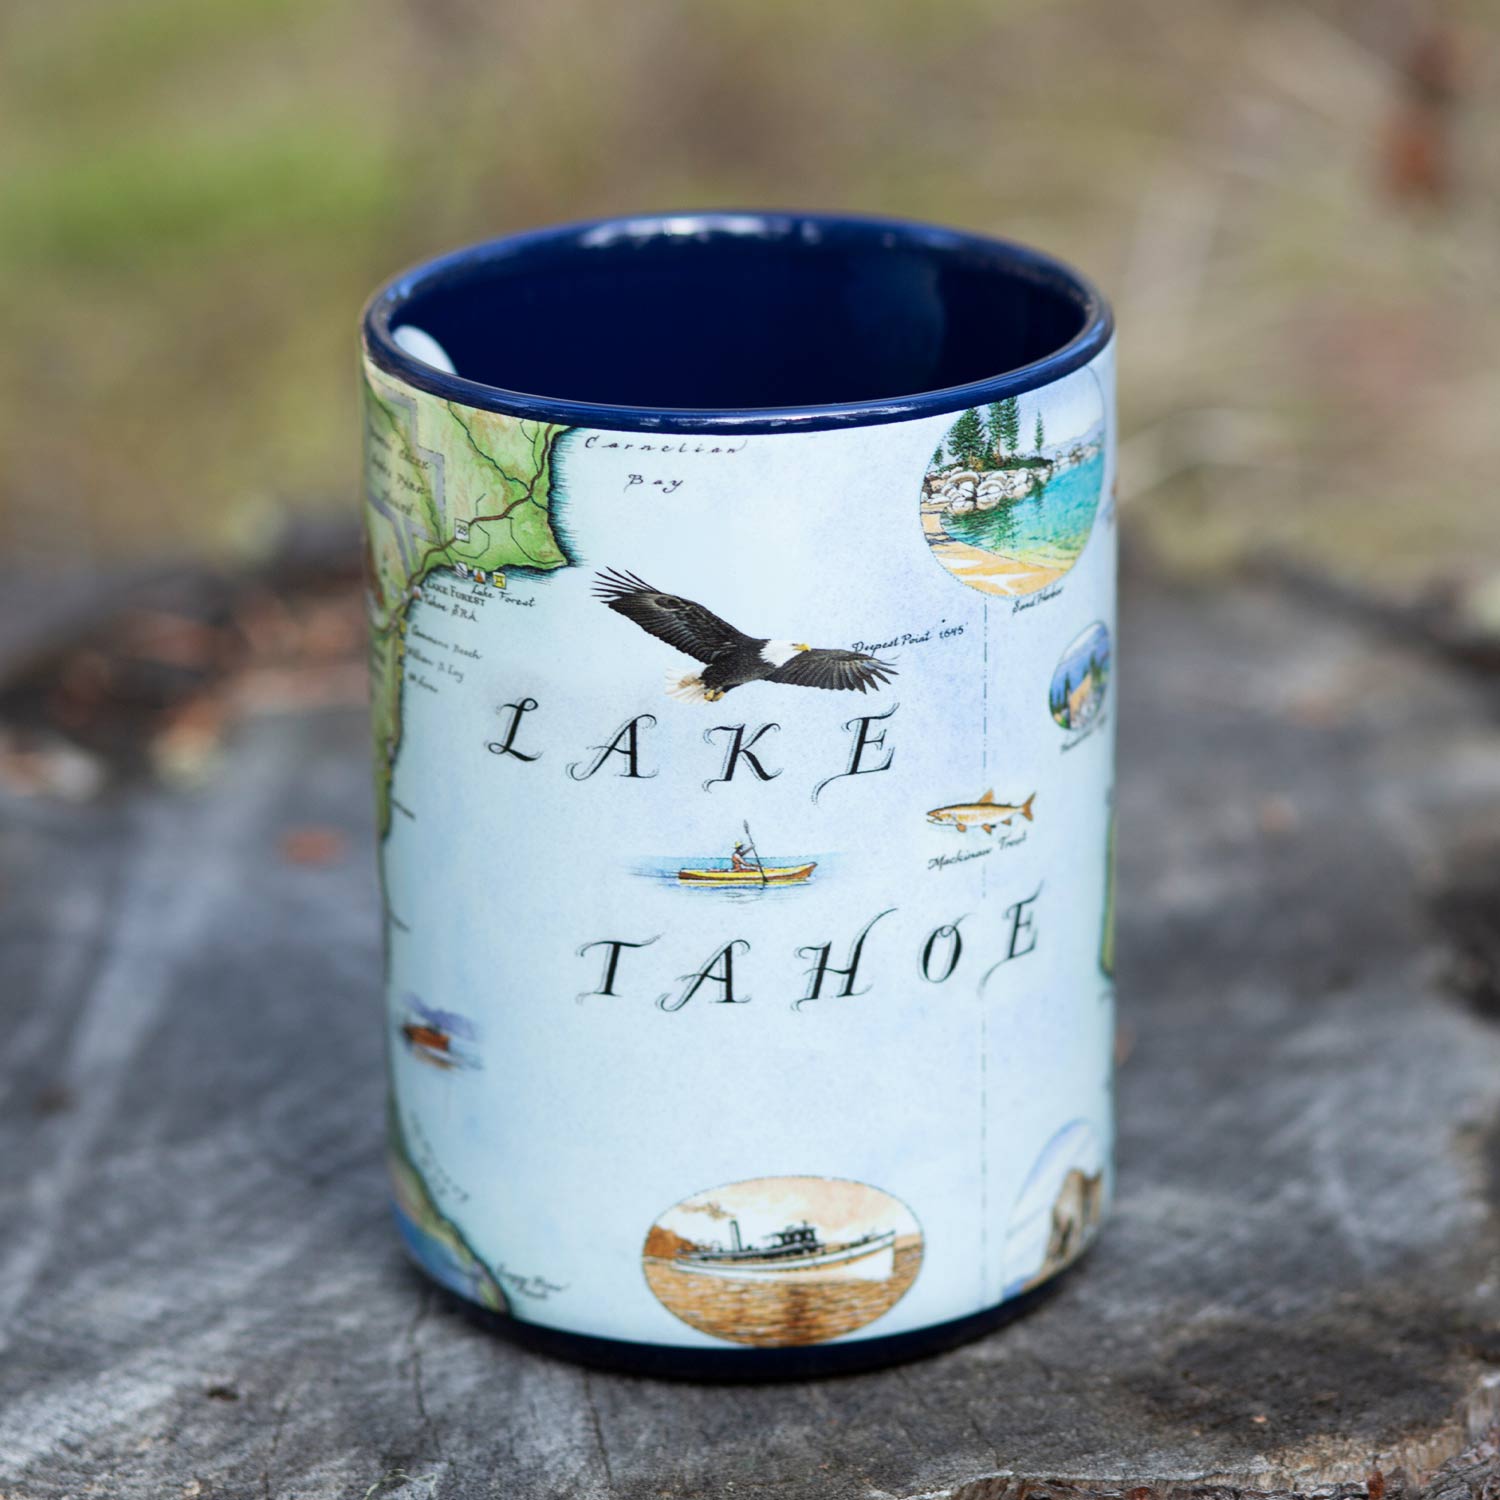 Blue 16 oz Lake Tahoe map ceramic coffee mug sitting on a tree stump. The cup features bald eagle, boats, bear, fish, Emerald Bay State Park, Spooner Lake, Cove Rock, and Thunderbird Lodge.